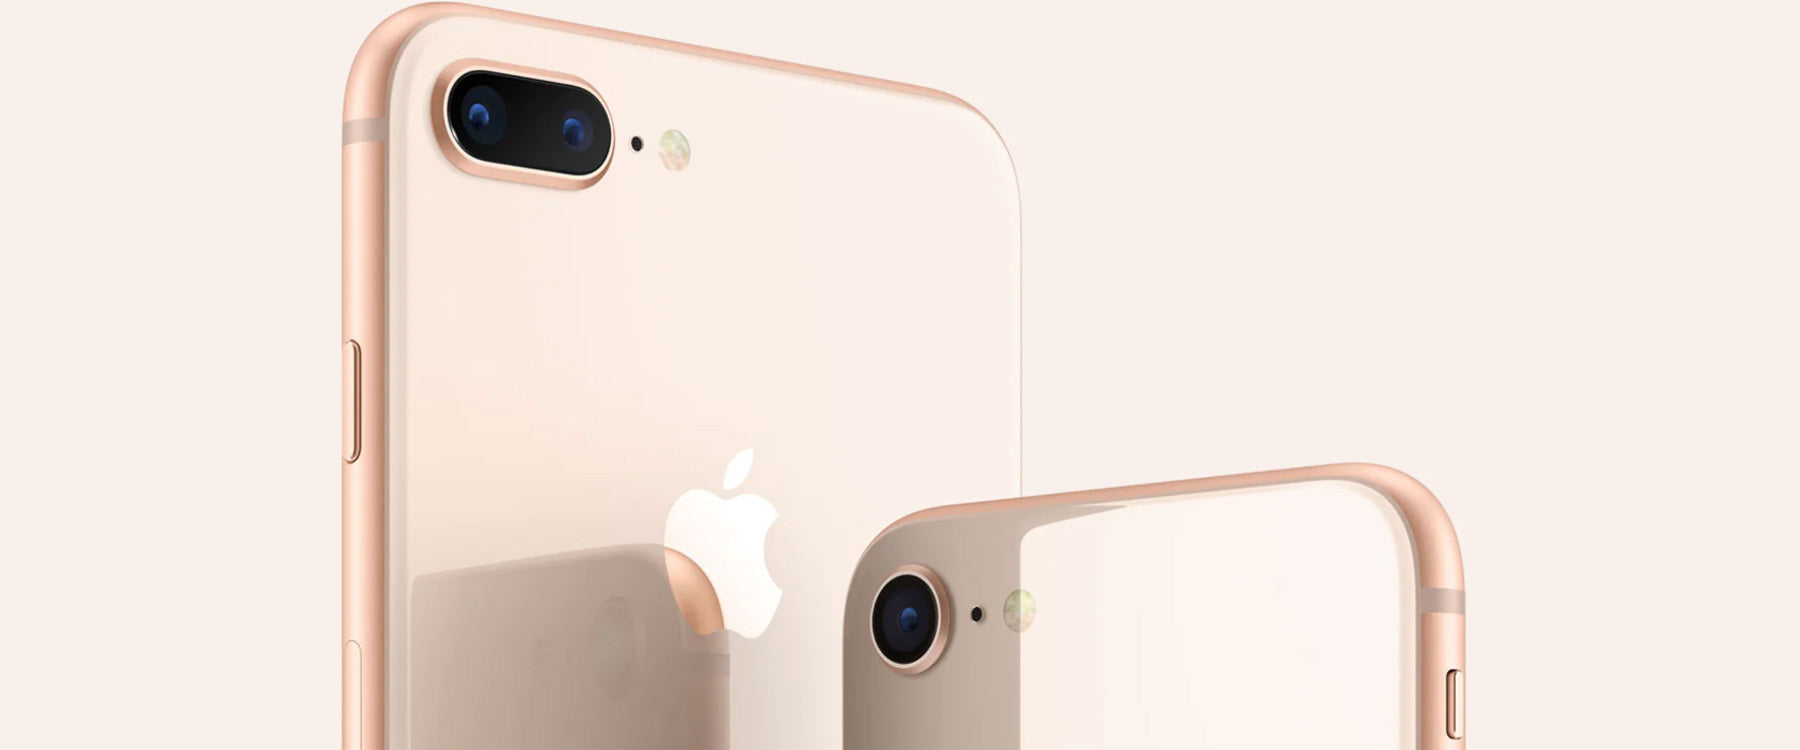 iPhone 8 & iPhone 8 Plus Cases, Covers, Screen Protectors & Cables